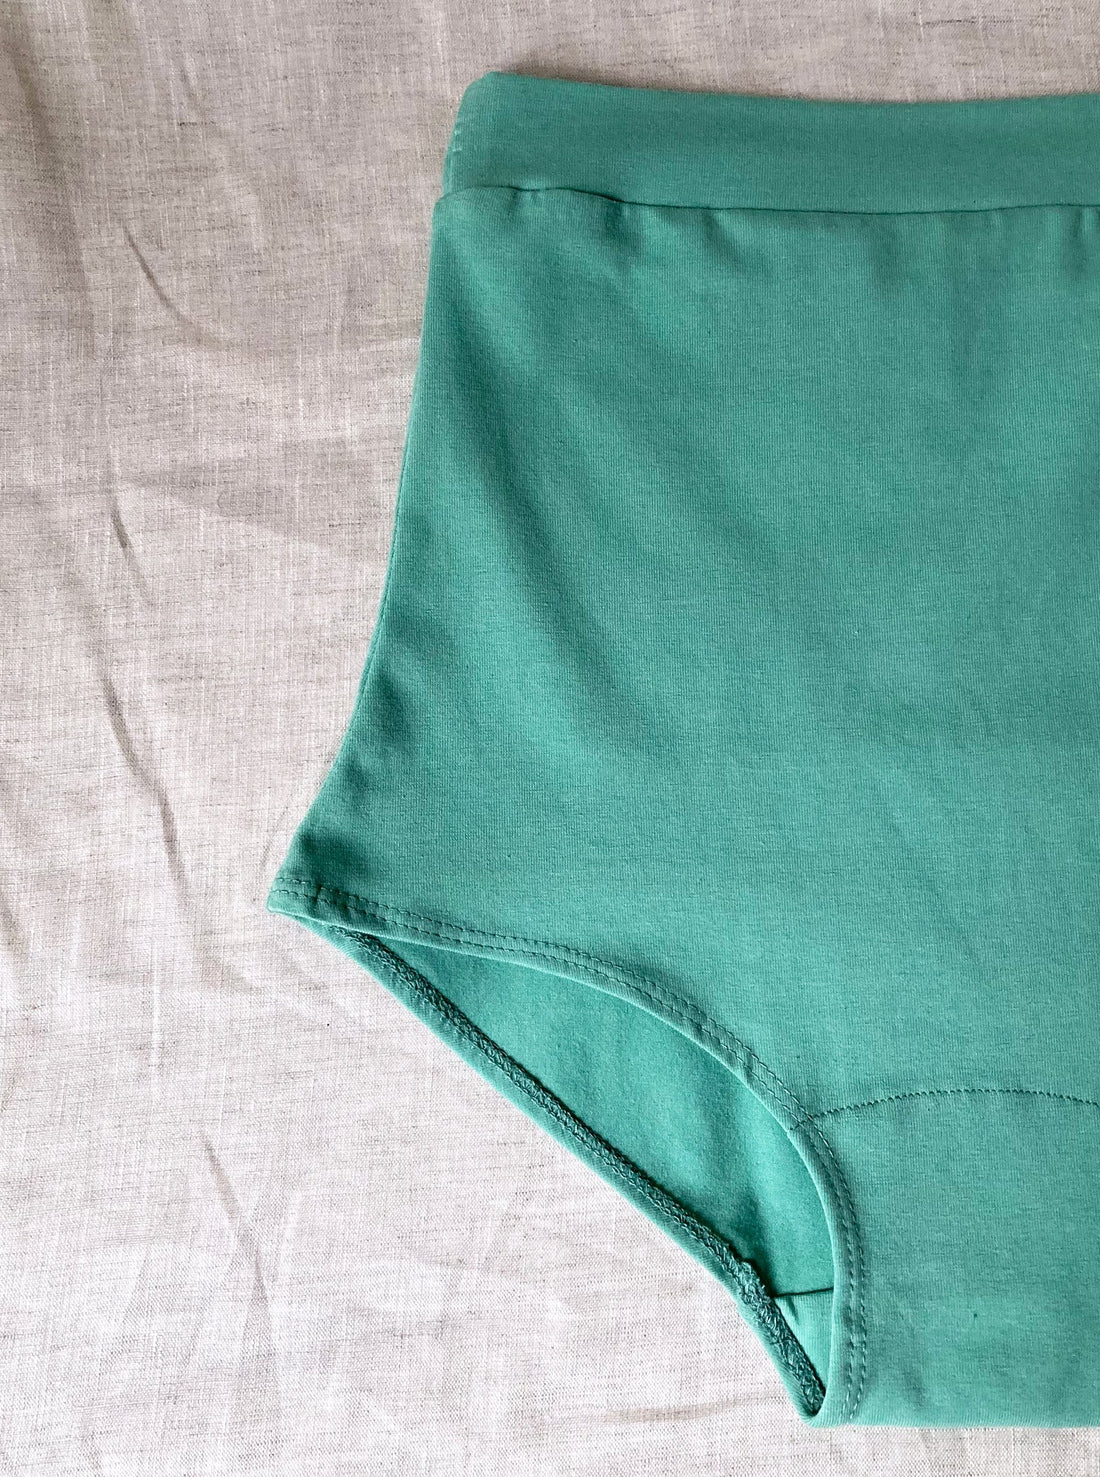 Linen Natural Panties/knickers of High Rise/ Linen Underwear Eco